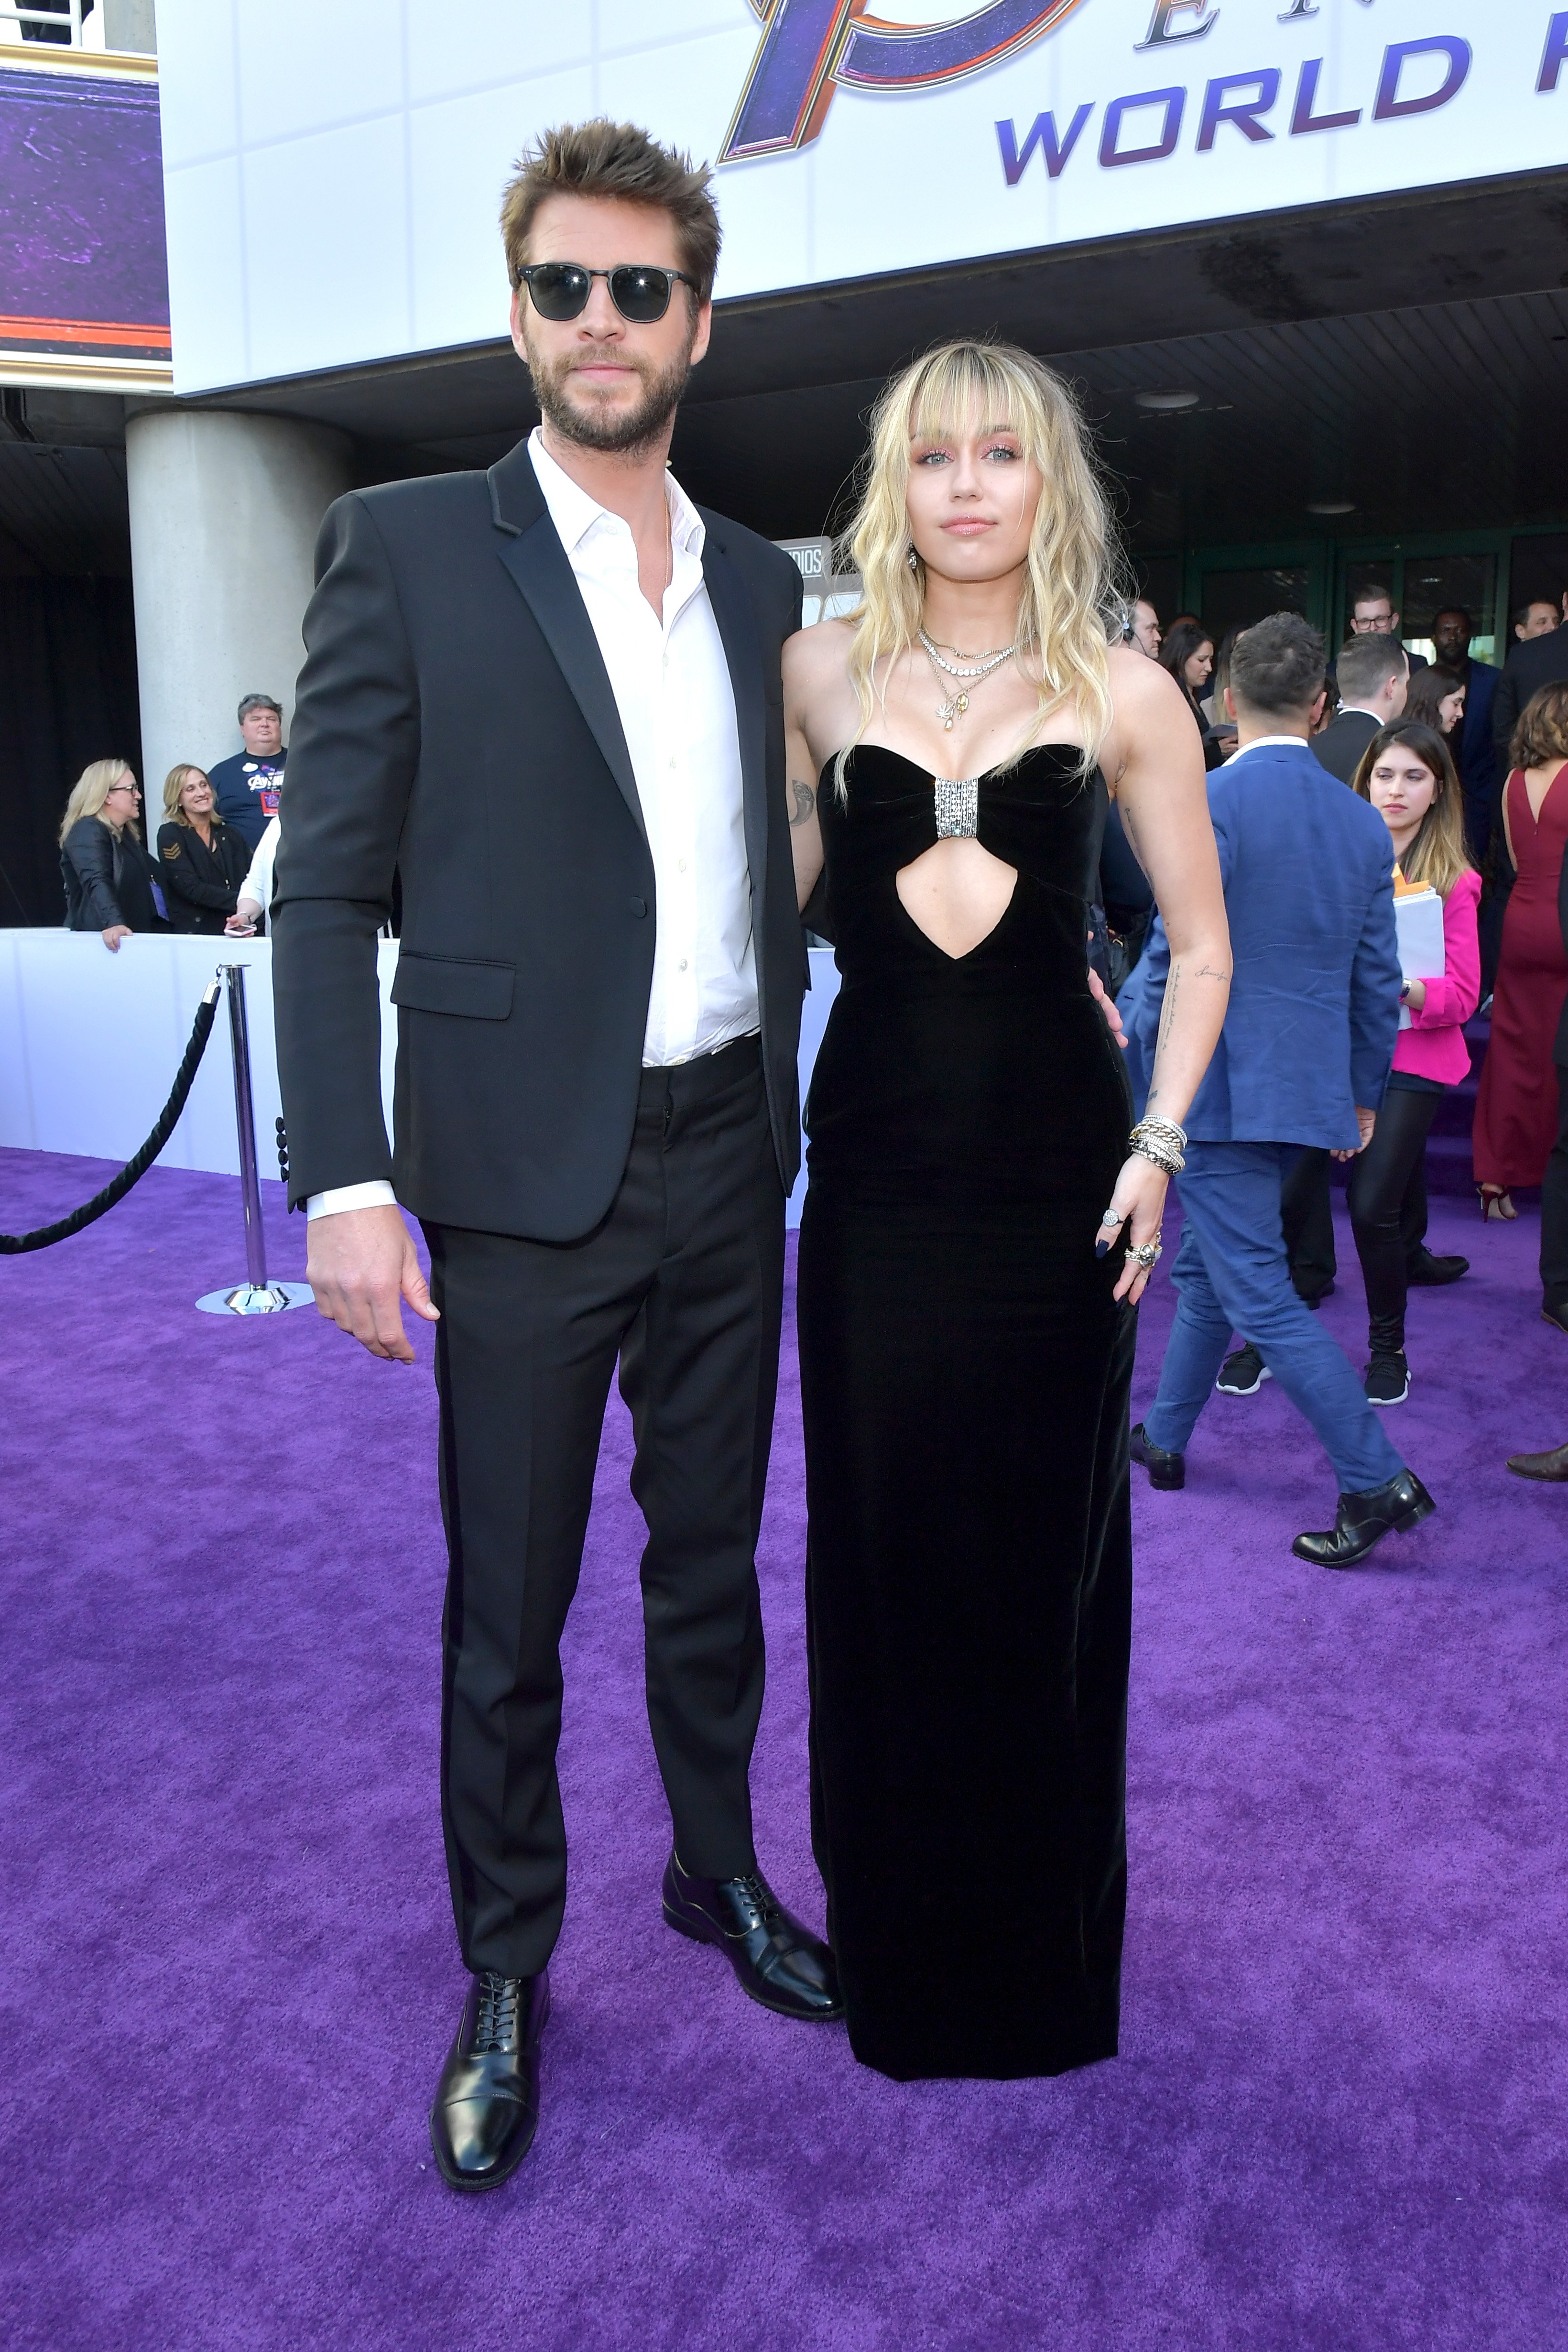 Miley Cyrus and Liam Hemsworth attend the premiere for "Avengers: Endgame" in Los Angeles in April 2019| Photo: Getty Images